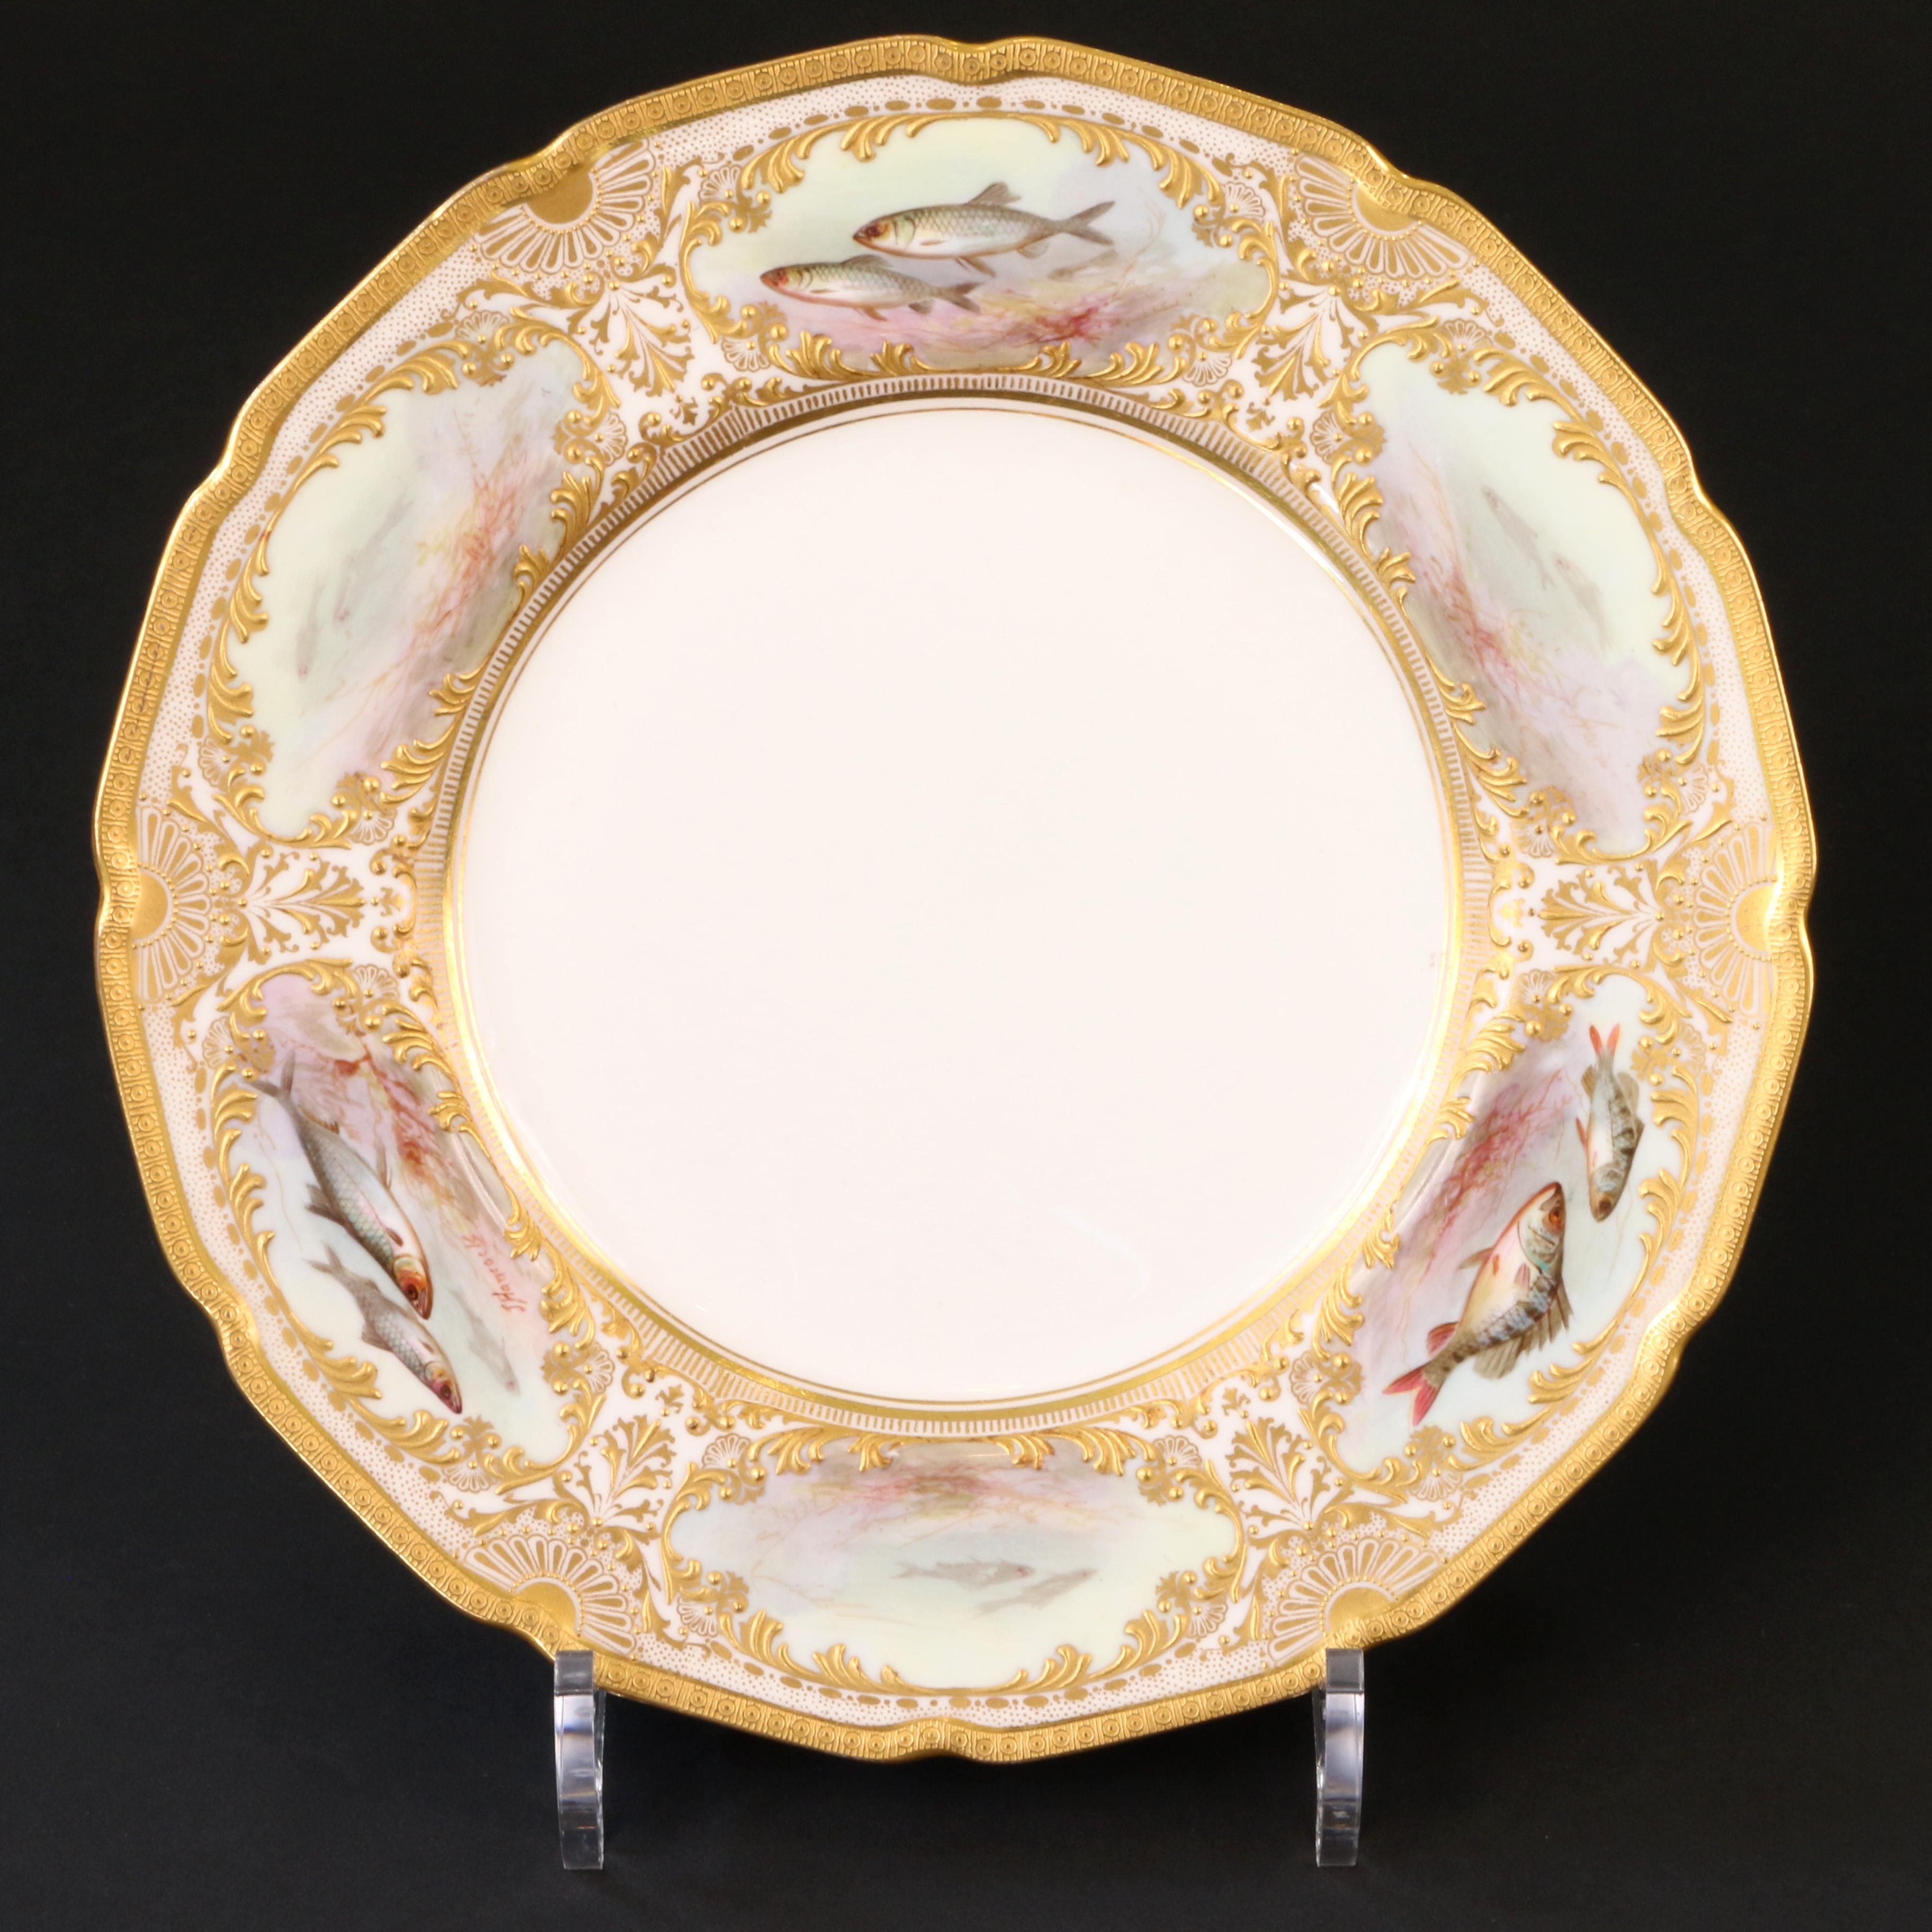 12 Royal Doulton Hand Painted and Heavily Gilded Fish Plates In Excellent Condition For Sale In New York, NY